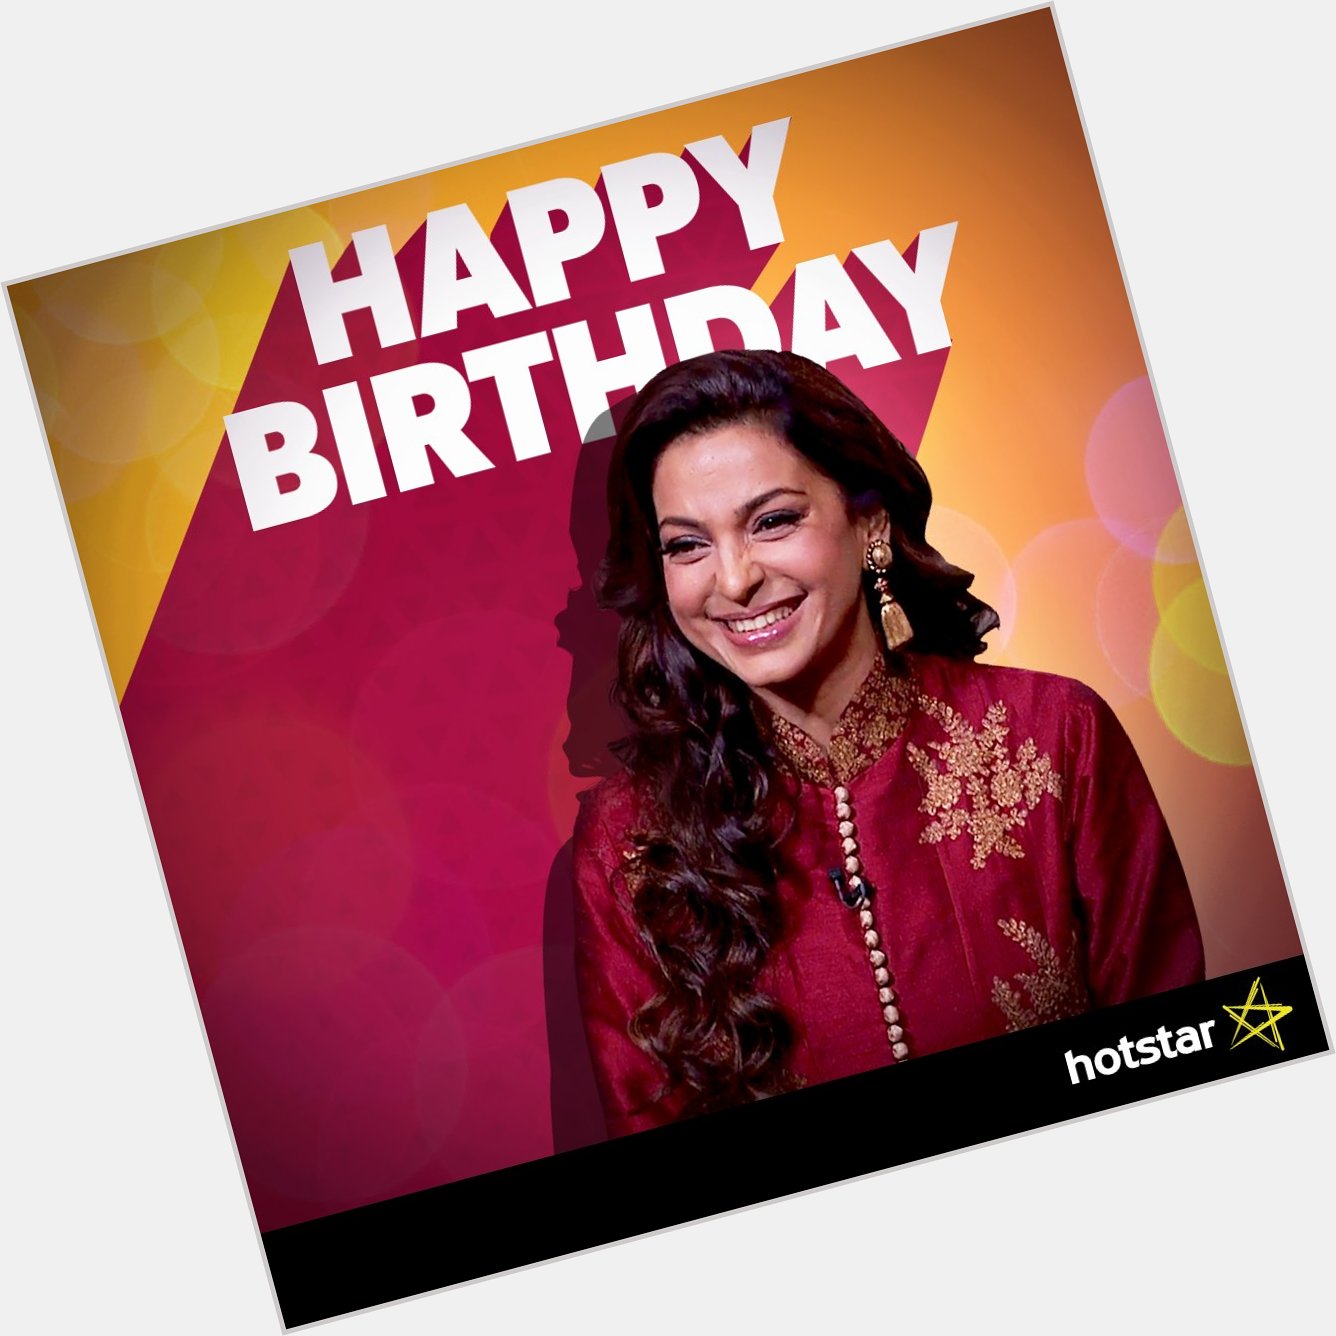 Happy birthday to the woman with the million-dollar smile, Juhi Chawla! 